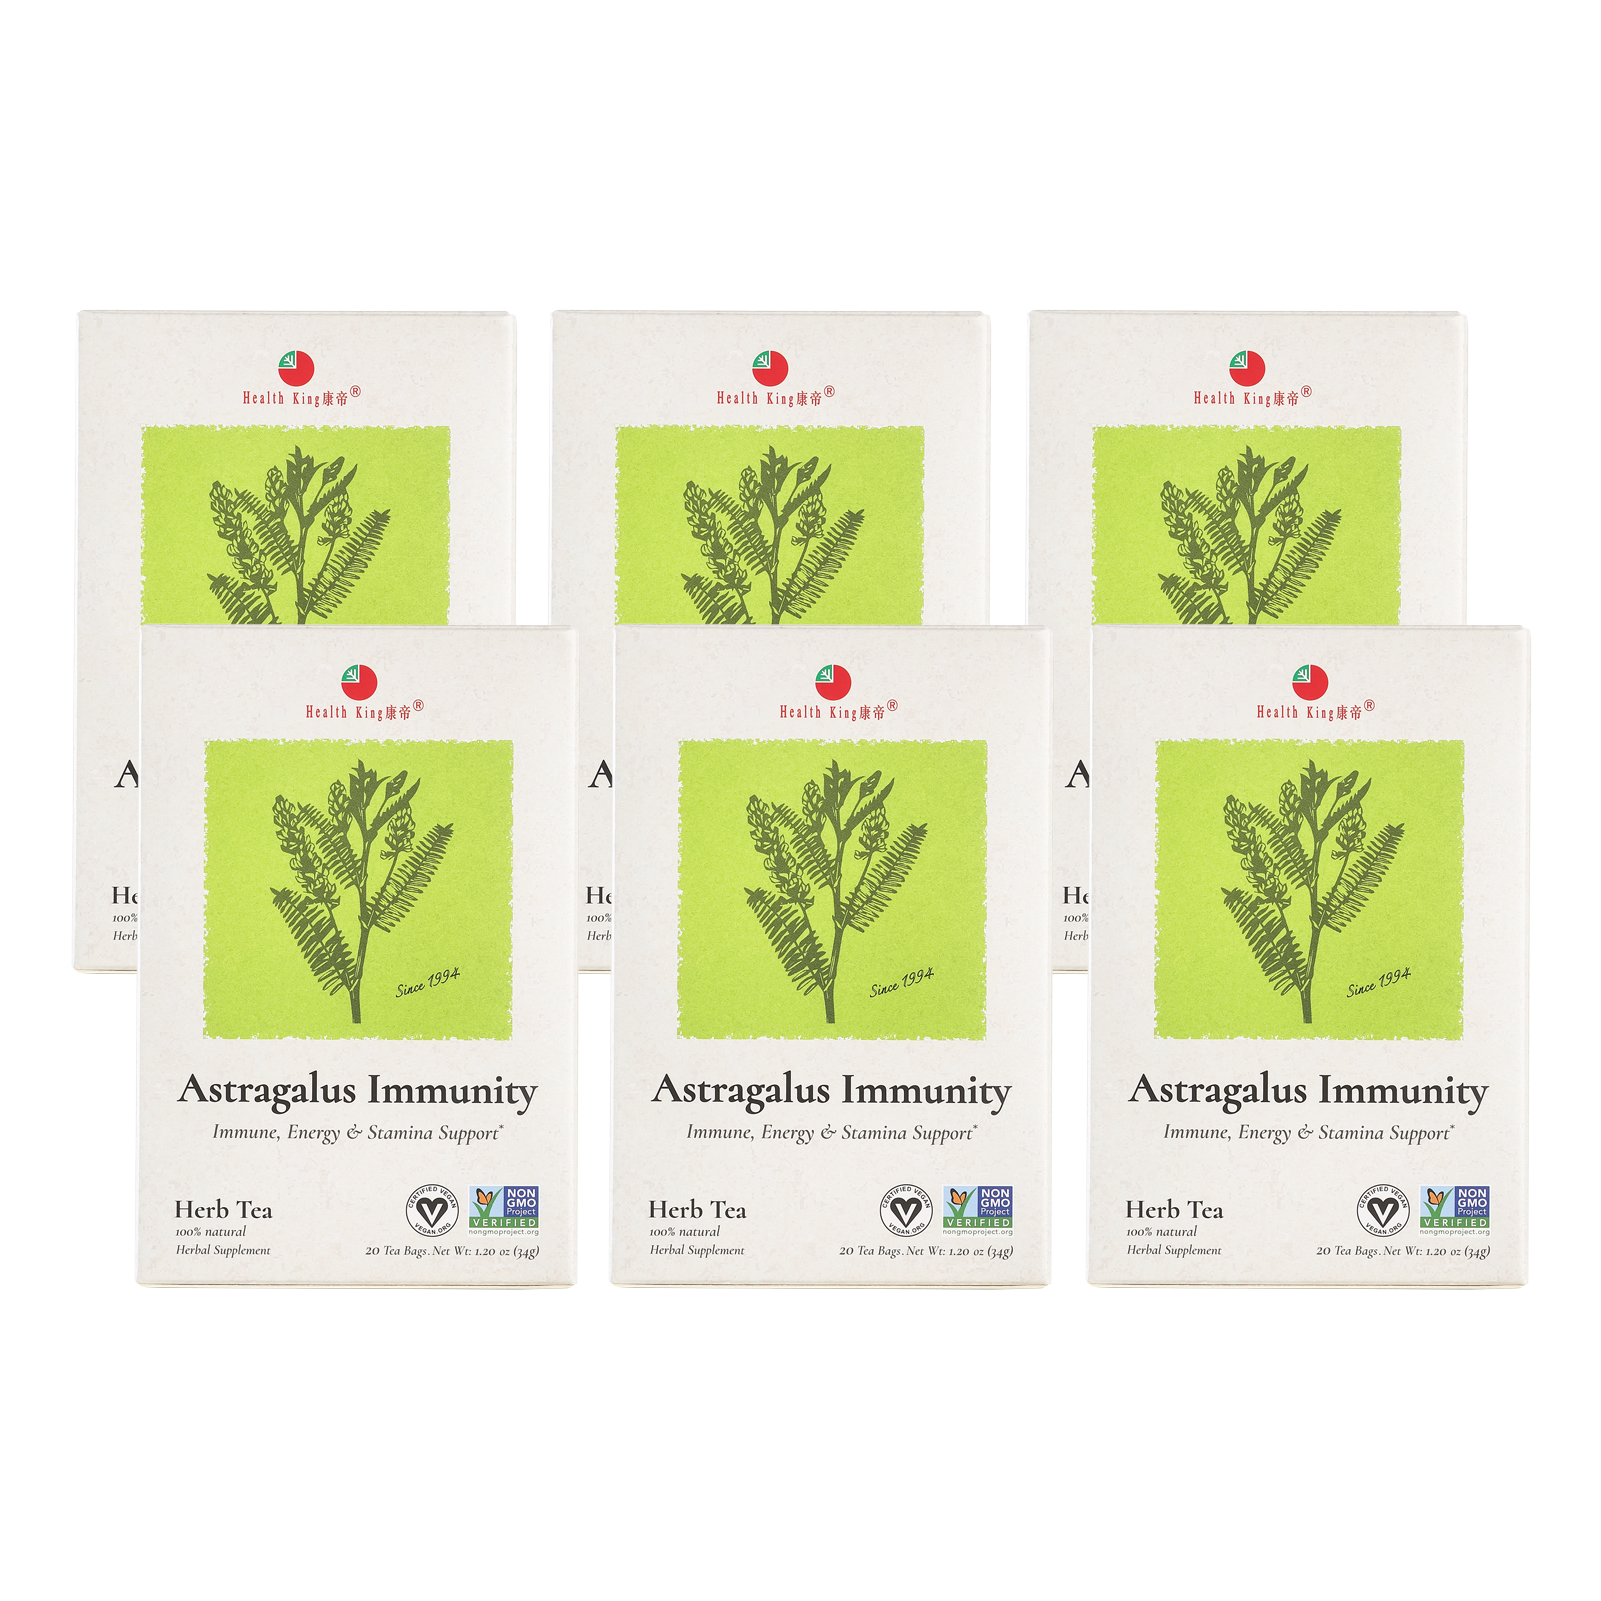 Close-up of Astragalus Immunity Herb Tea packet with product information